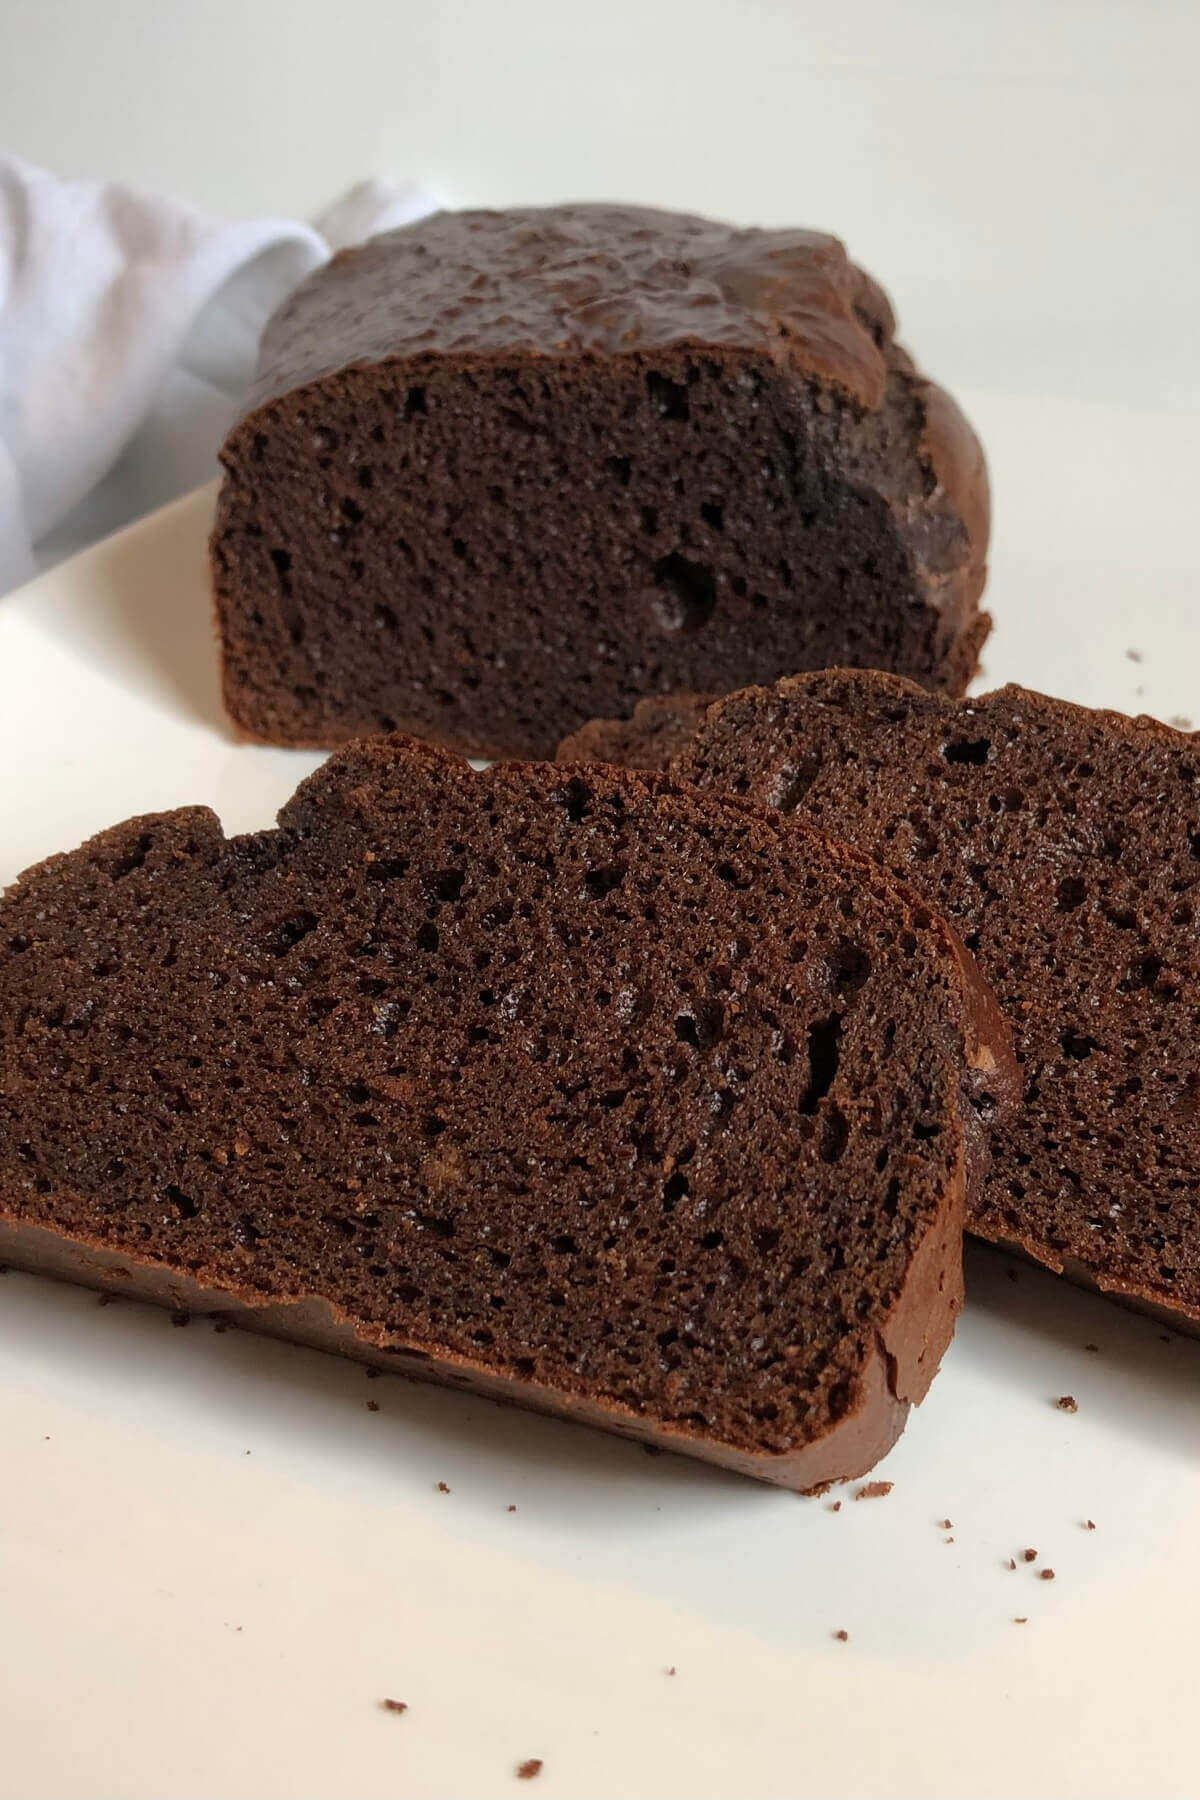 Brown bread on a white platter with two slices cut.